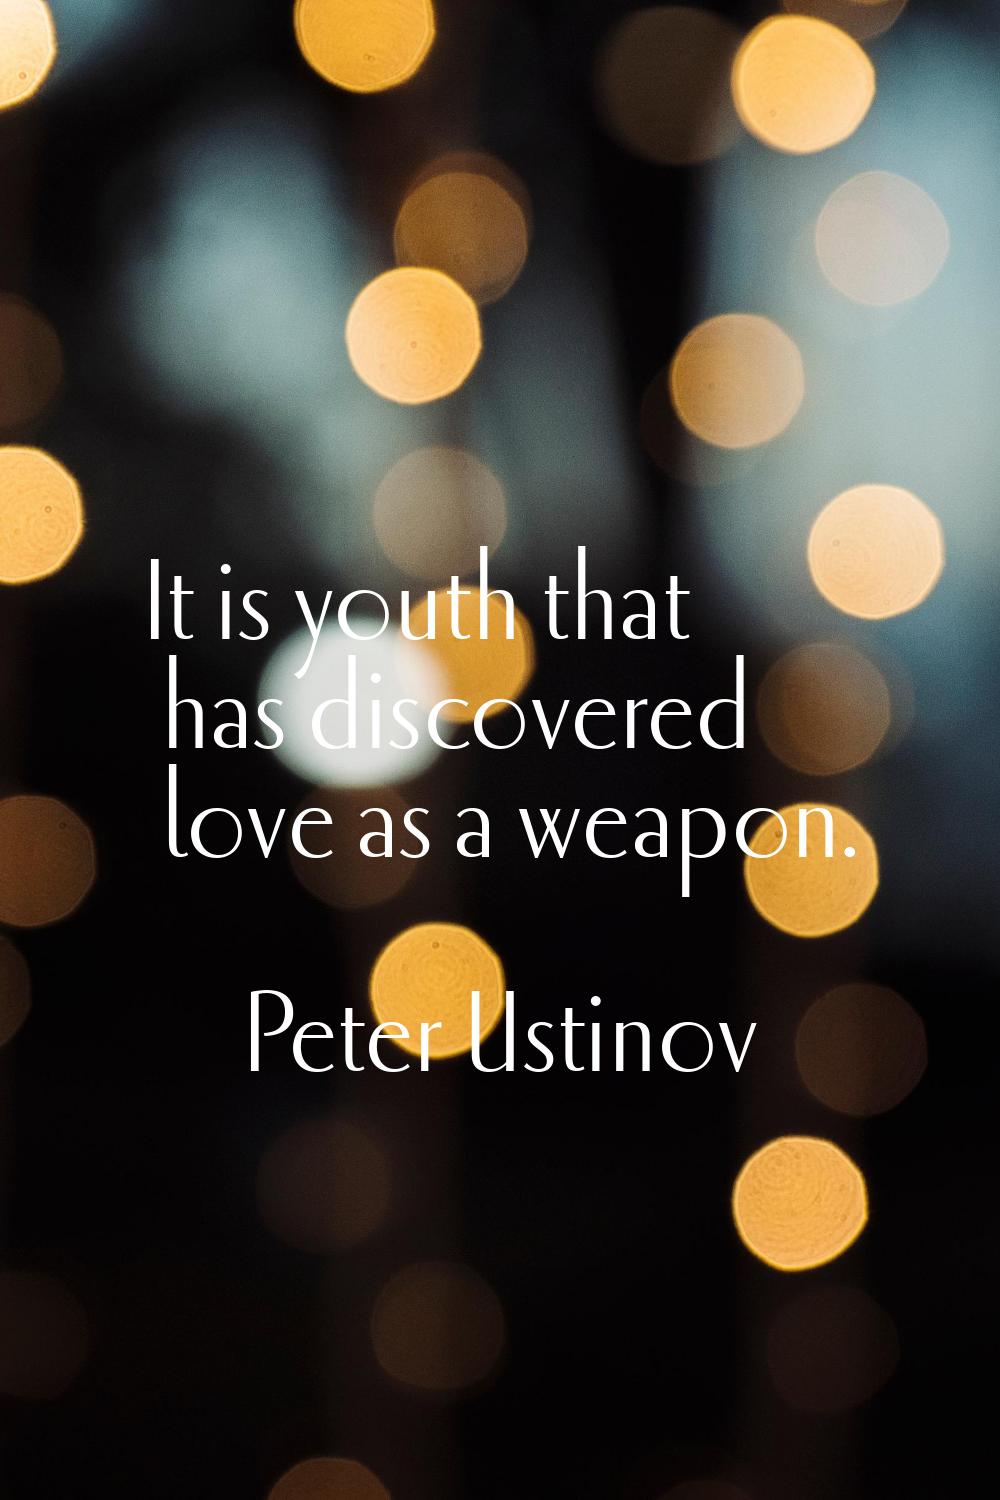 It is youth that has discovered love as a weapon.